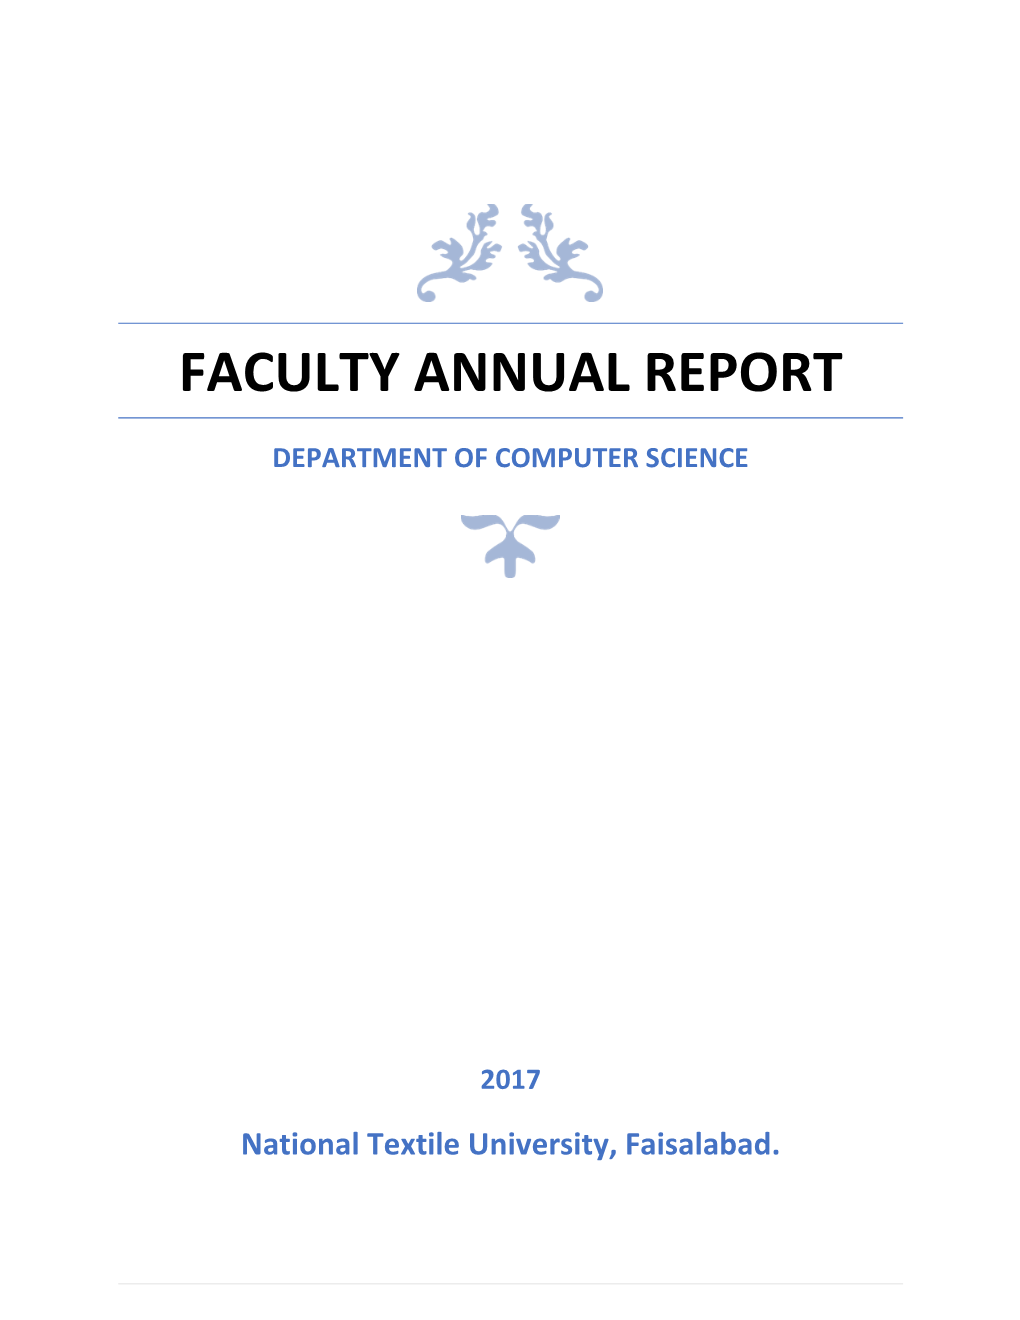 The Department of Computer Science Published the Annual Report of 2017